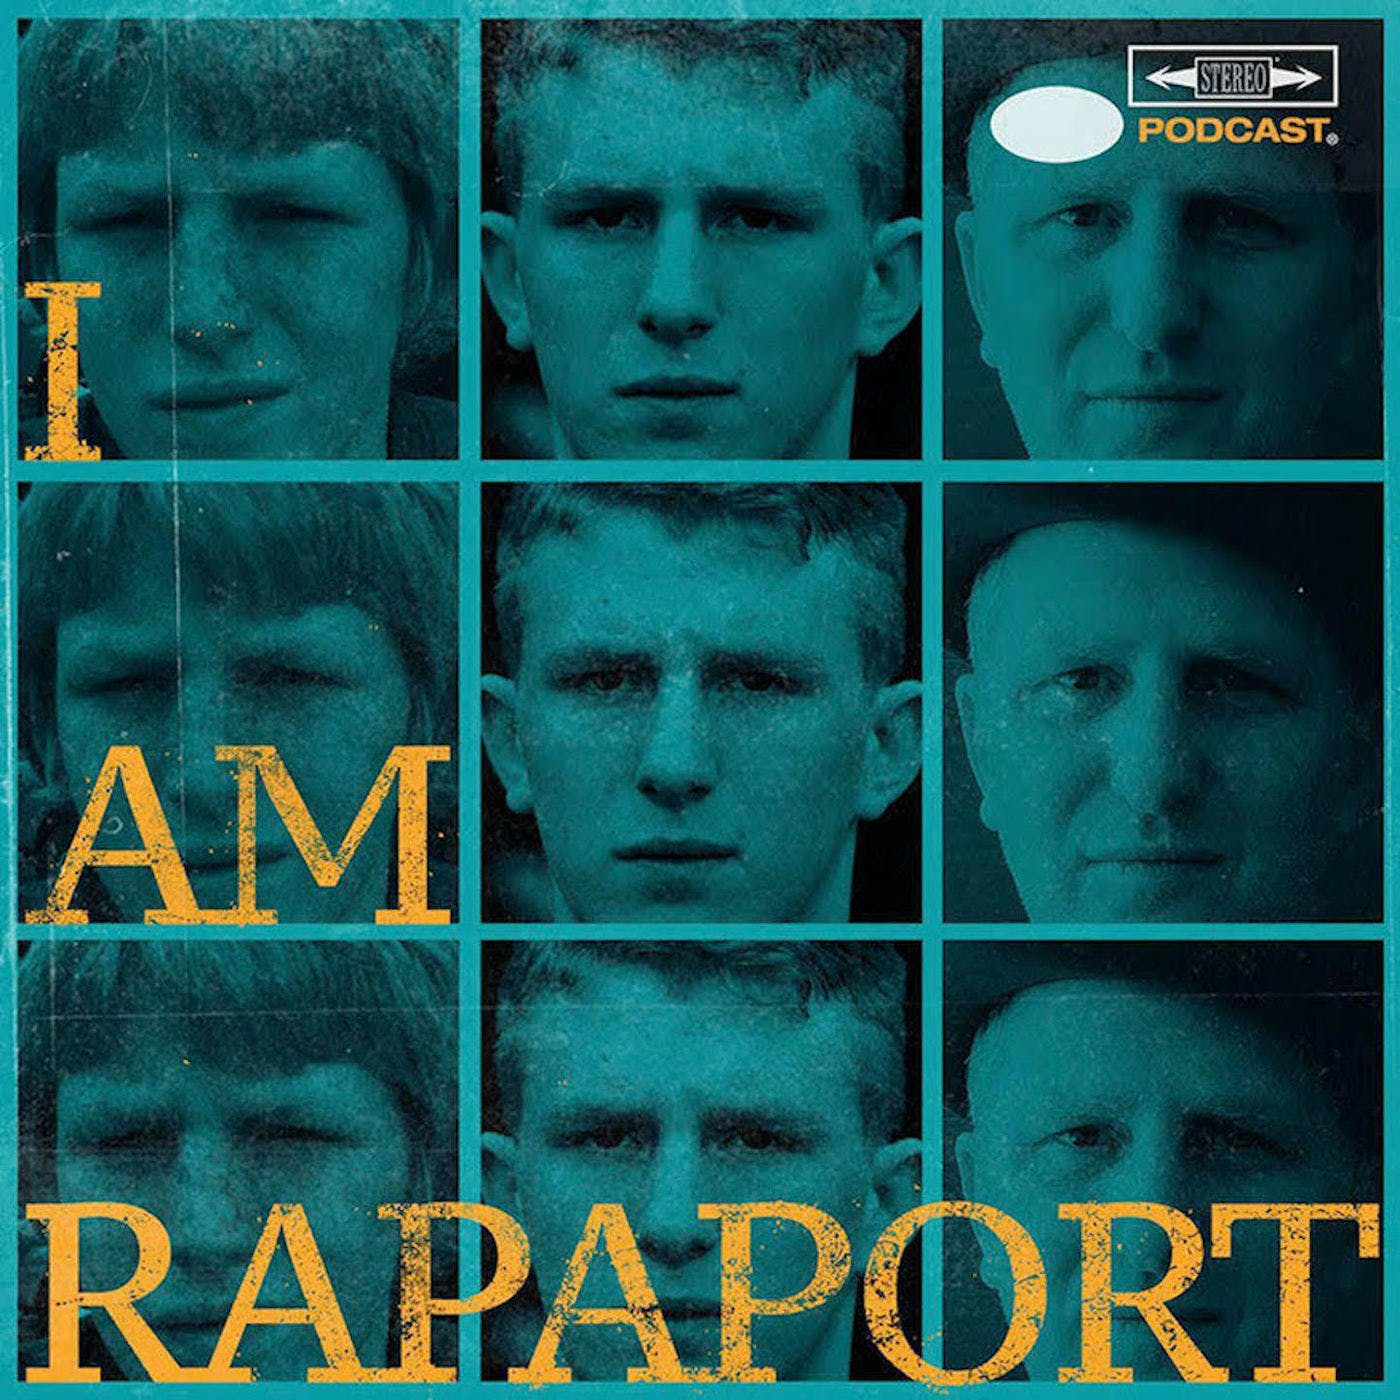 EP 106 - MICHAEL RAPAPORT & GERALD MOODY LIVE PODCAST IN BREWSTER, NY - A THANKSGIVING TREAT!